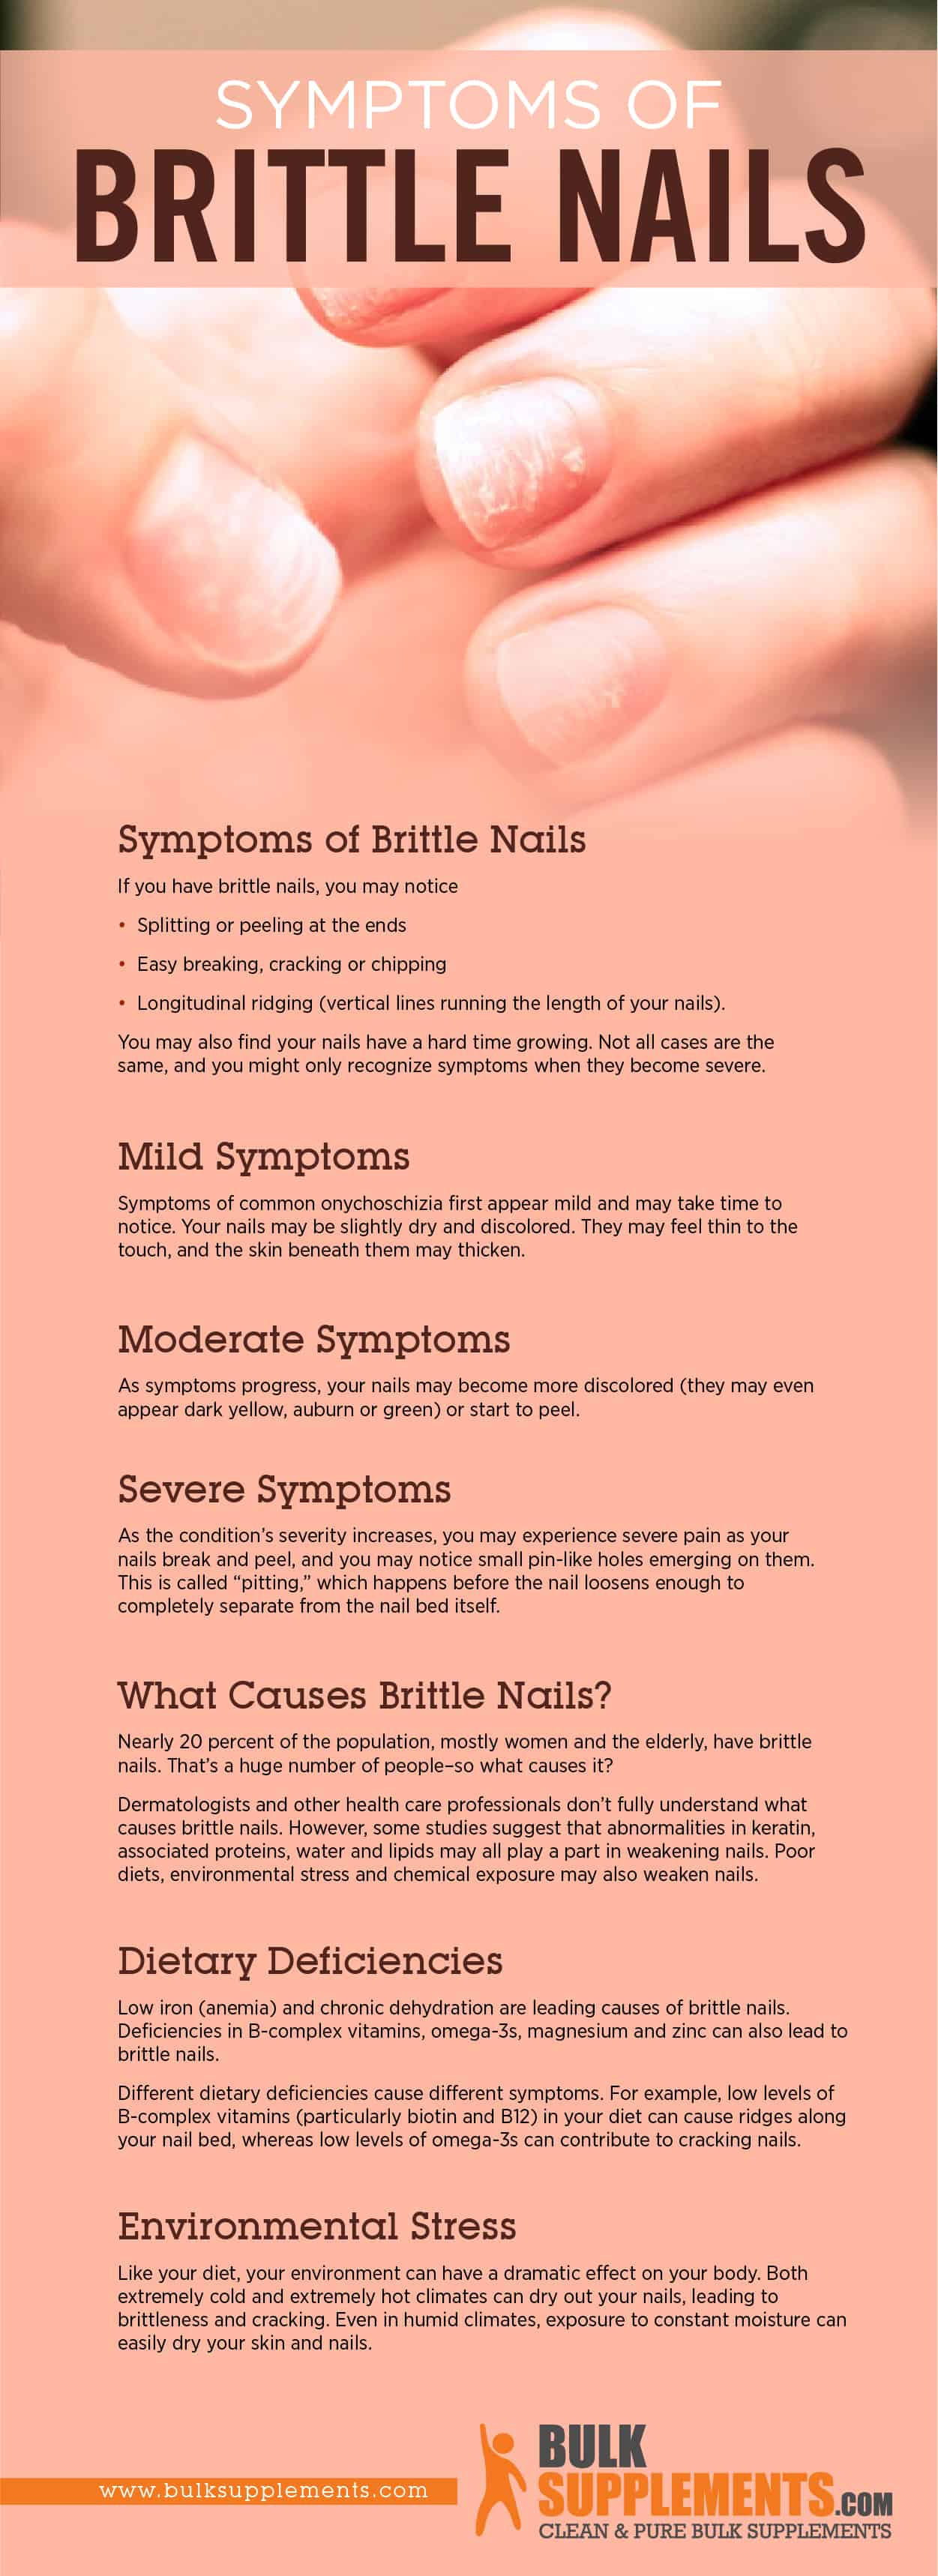 Deformities, Dystrophies, and Discoloration of the Nails - Skin Disorders -  MSD Manual Consumer Version